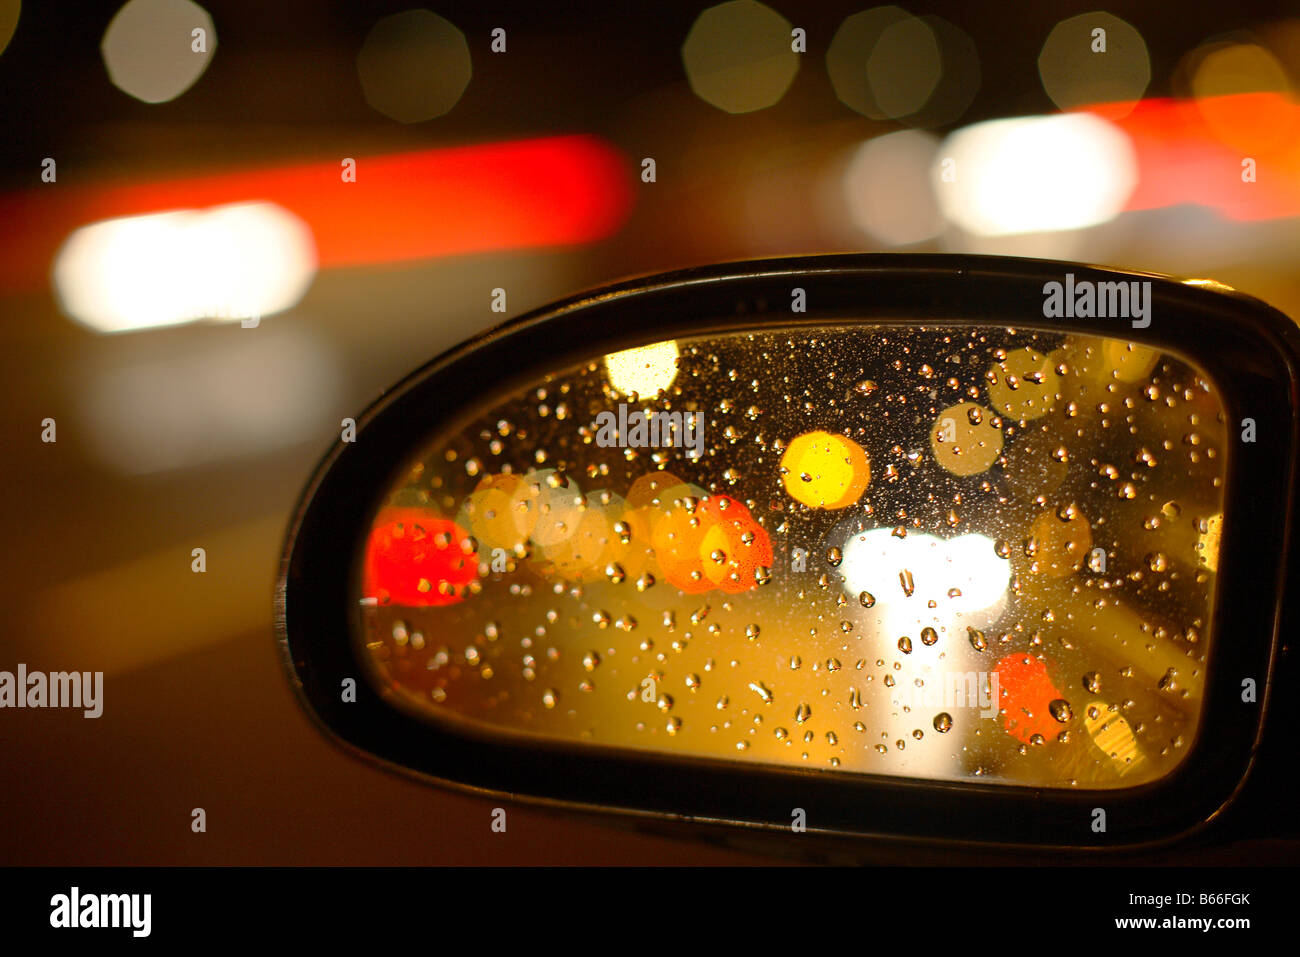 city car side rearview mirror with lights and raindrops Stock Photo